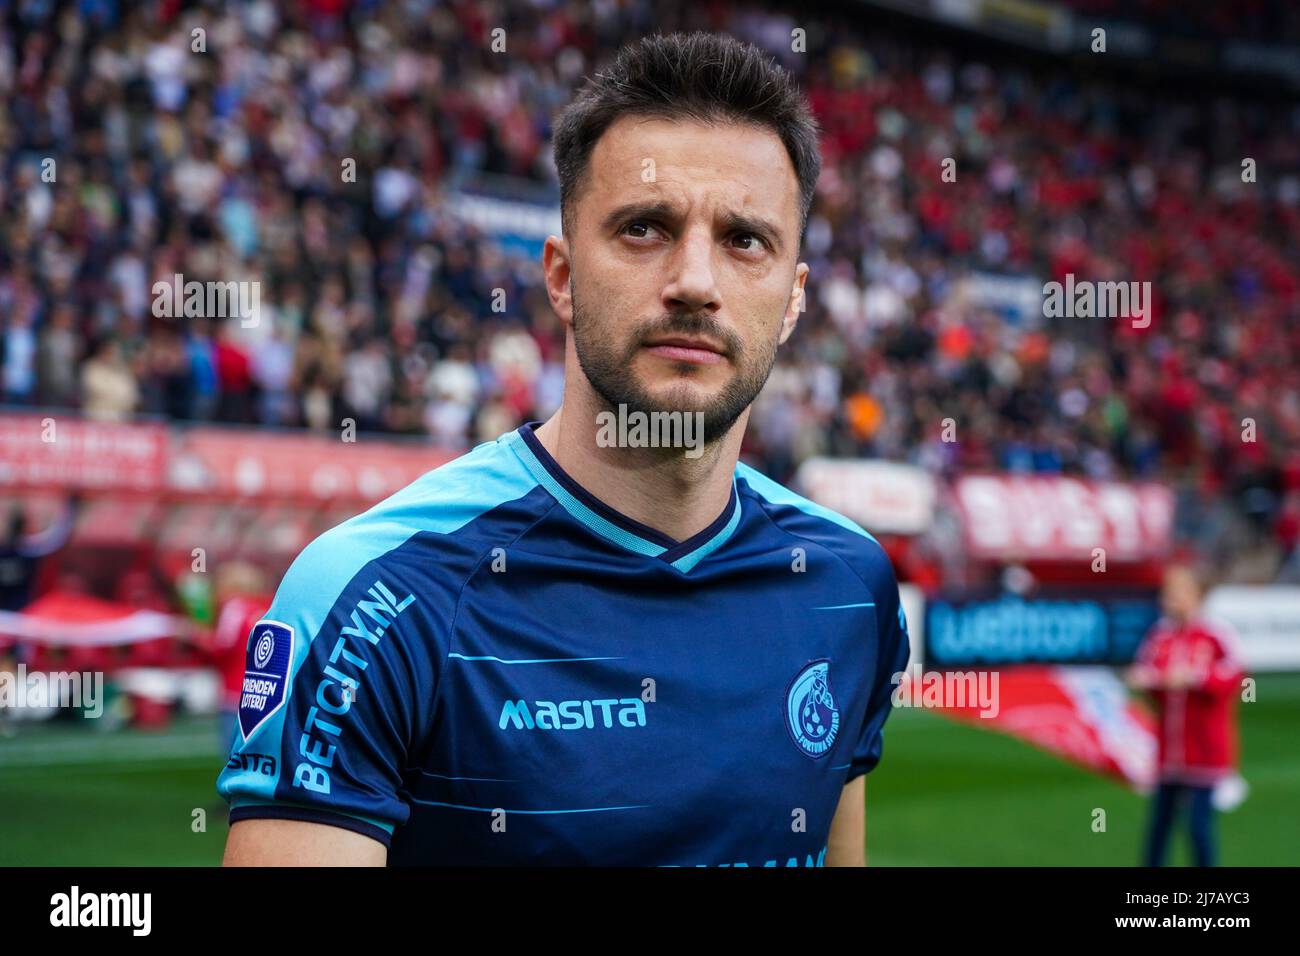 ENSCHEDE, NETHERLANDS - MAY 7: Andreas Samaris of Fortuna Sittard during the Dutch Eredivisie match between FC Twente and Fortuna Sittard at the Grolsch Veste on May 7, 2022 in Enschede, Netherlands (Photo by Joris Verwijst/Orange Pictures) Stock Photo